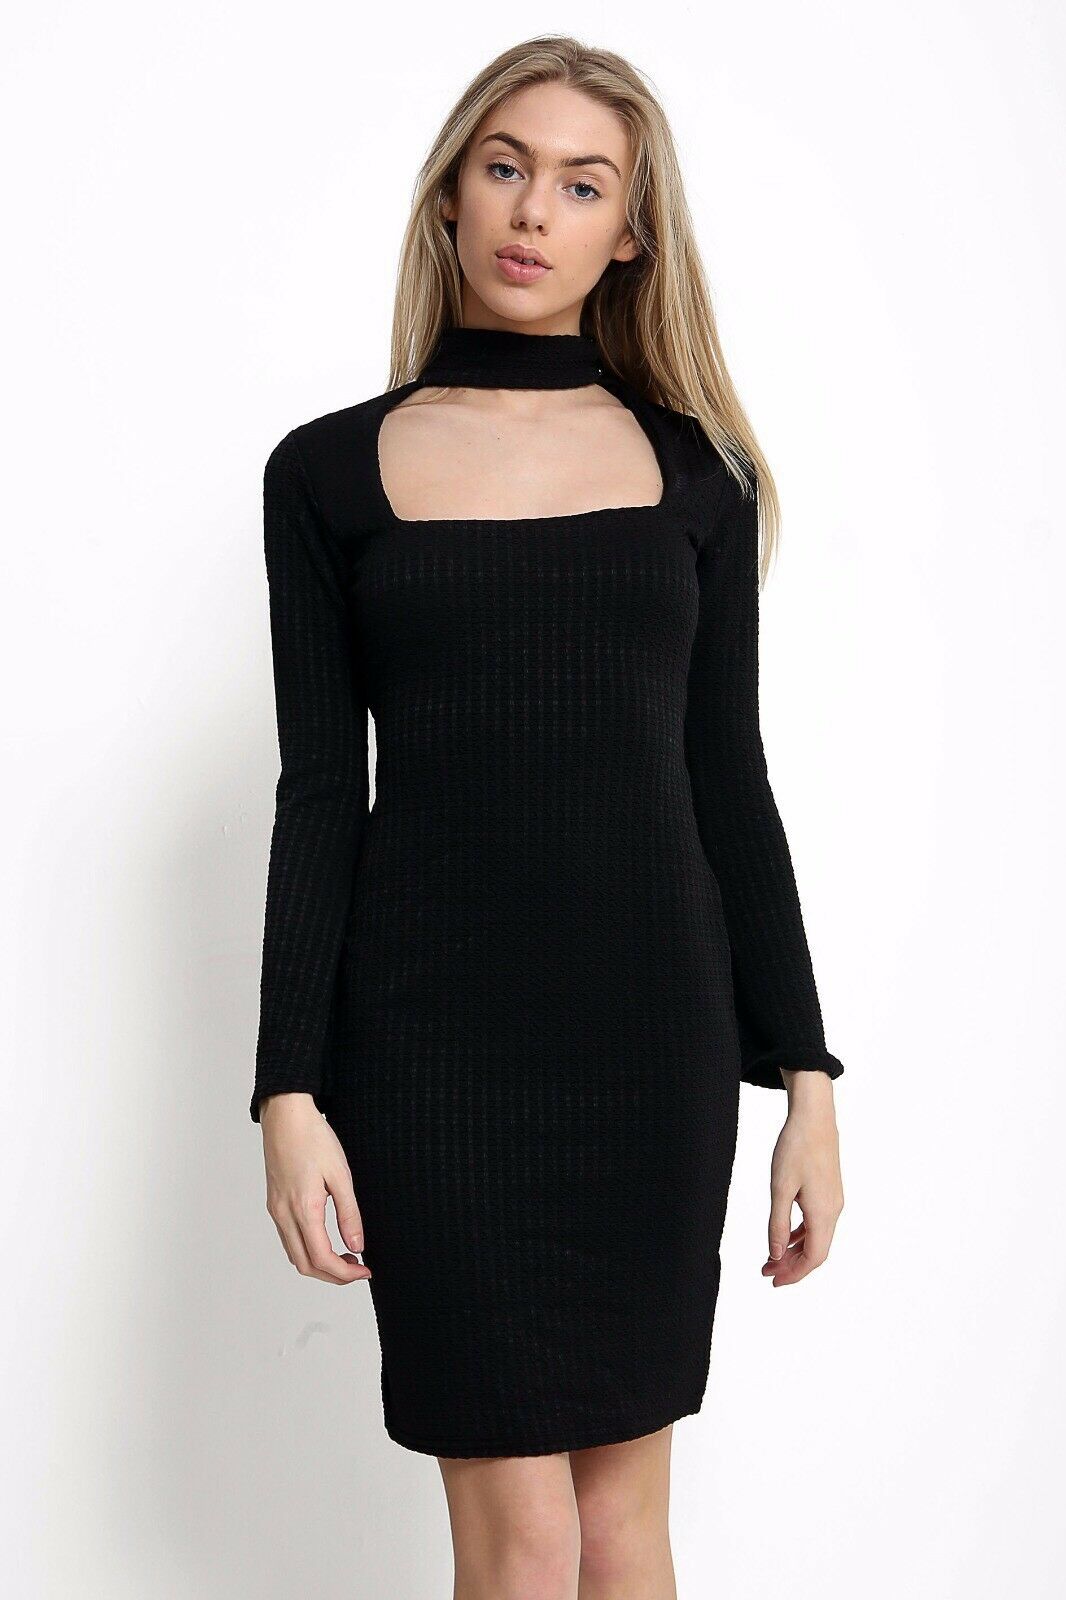 Ladies Black Long Sleeve Flared Dress With Choker Neck Detail. Size 6-14.